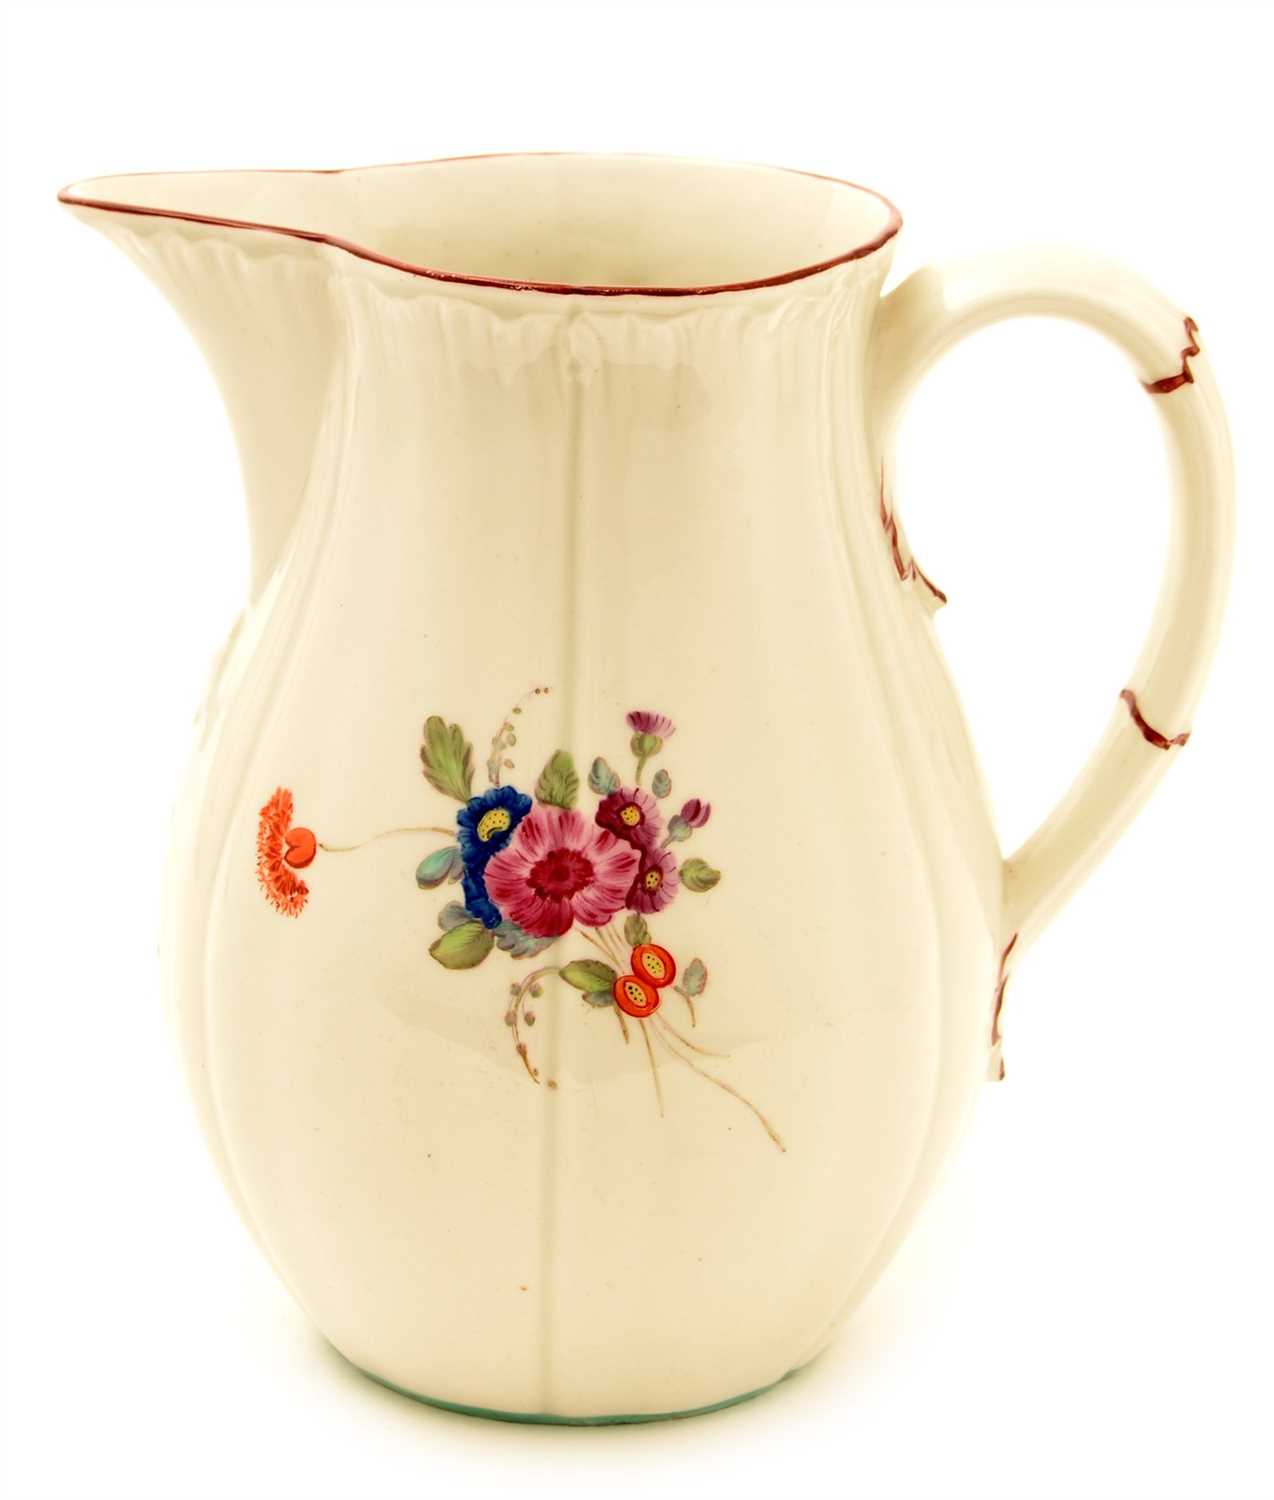 Lot 119 - An early 19th Century English soft paste porcelain ale jug.